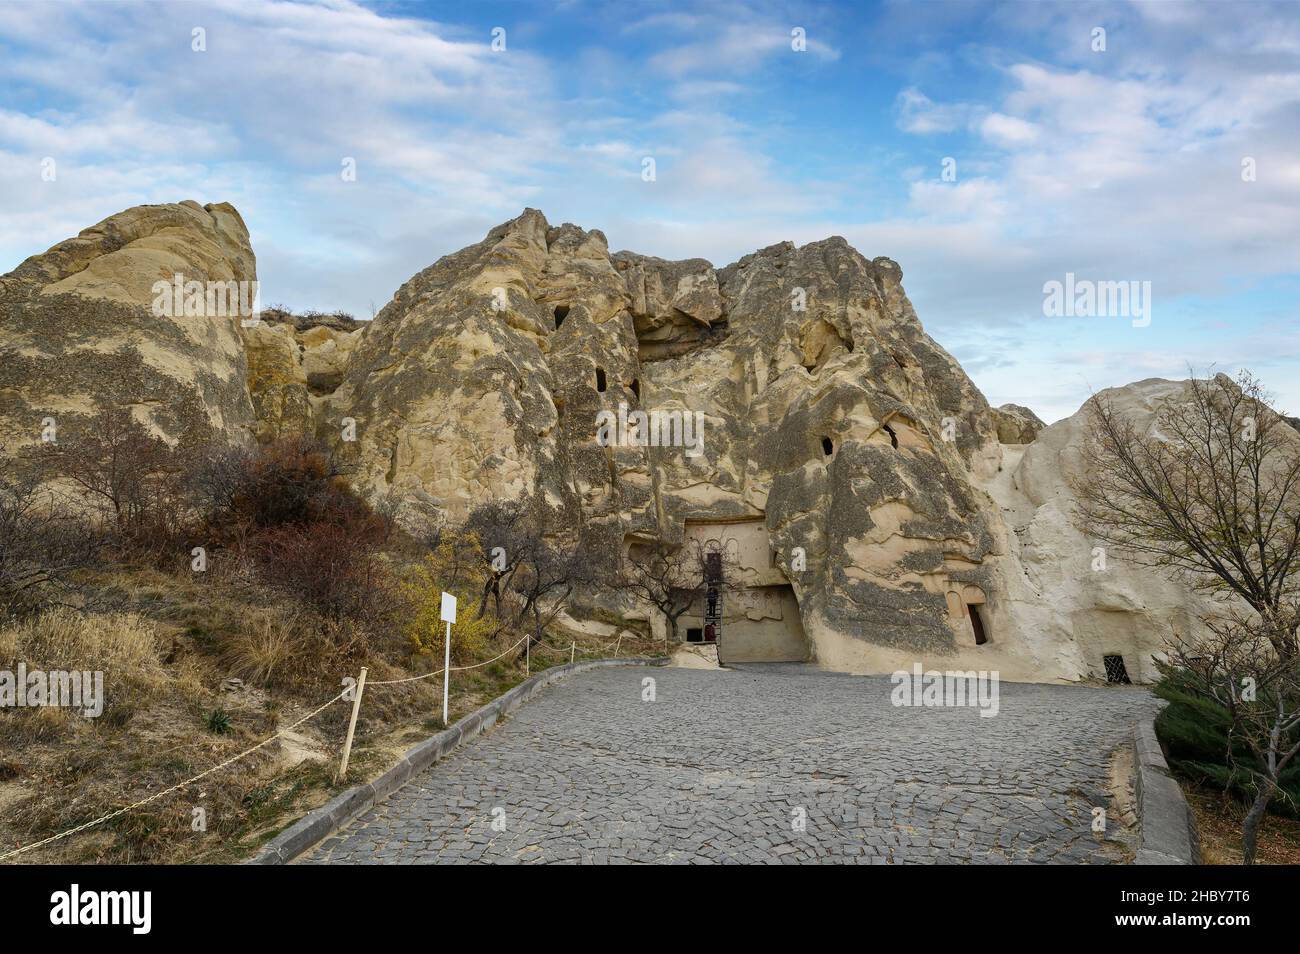 Goreme Open Air Museum in Goreme, Cappadocia - Nevsehir, Turkey. Ancient cave churches and rock formation. Stock Photo